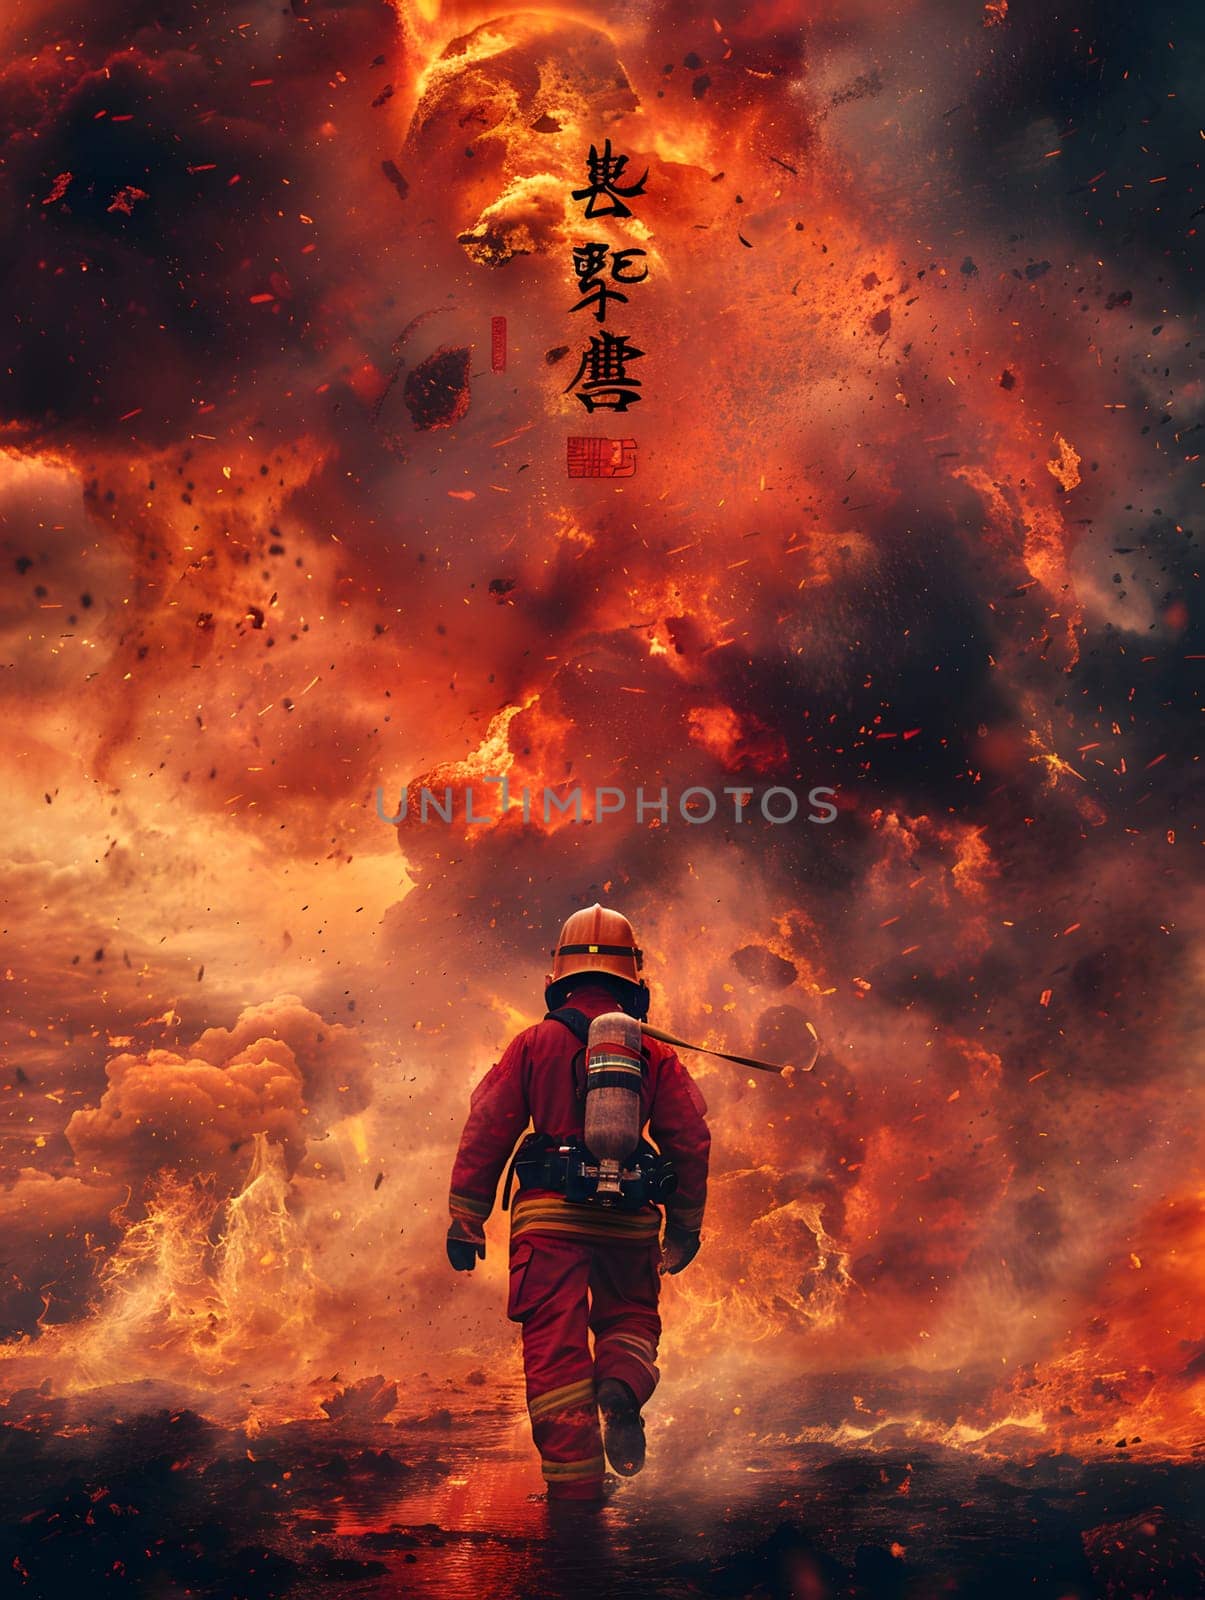 A firefighter is bravely navigating through a hazardous field of wildfire, encountering intense heat, flames, smoke, and pollution in the air